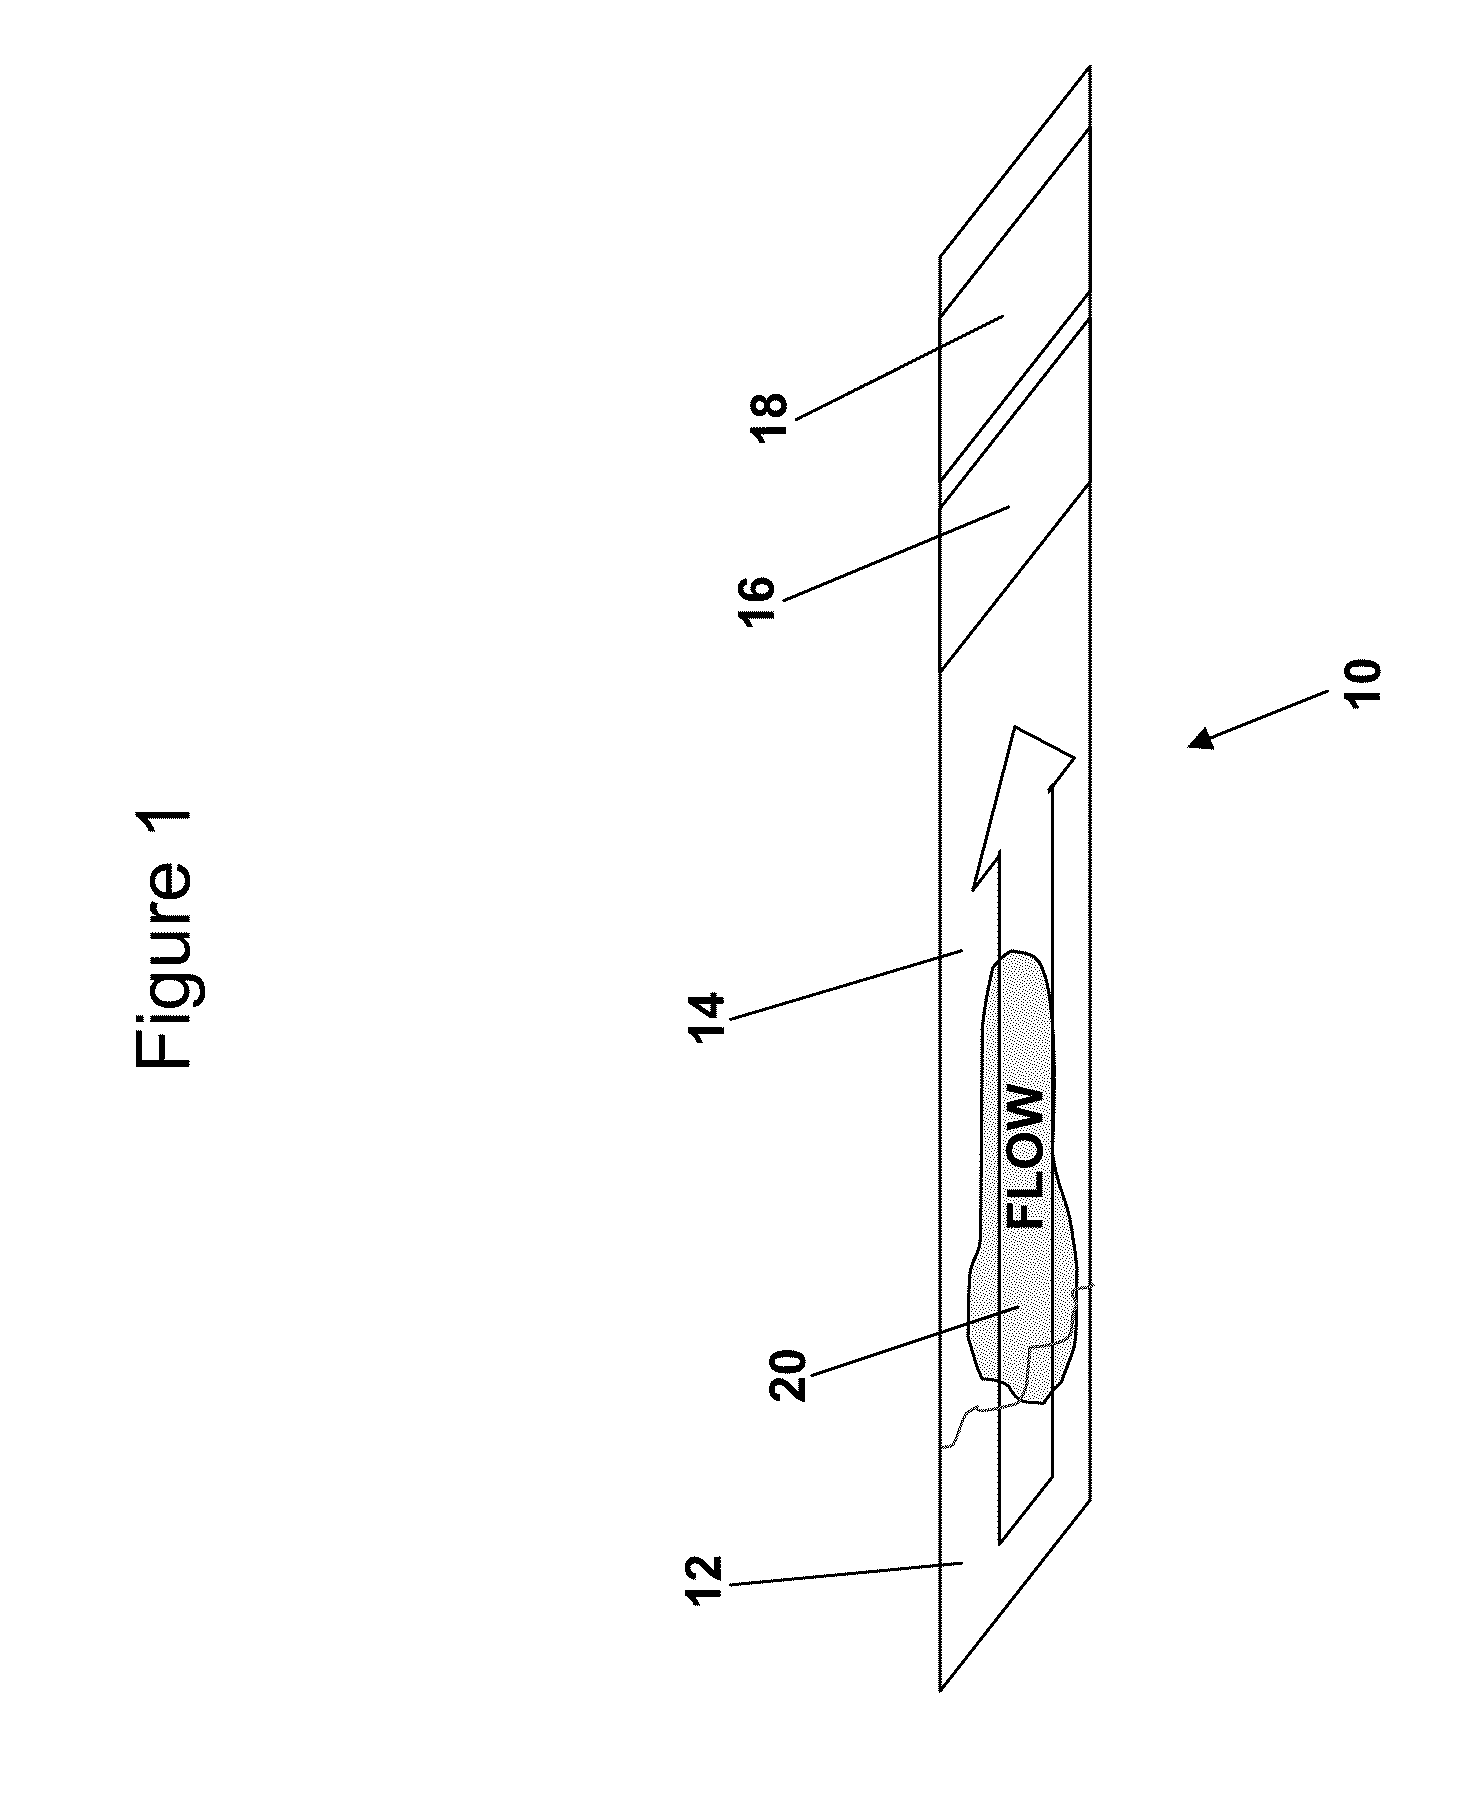 Methods and materials for detecting food containing allergens